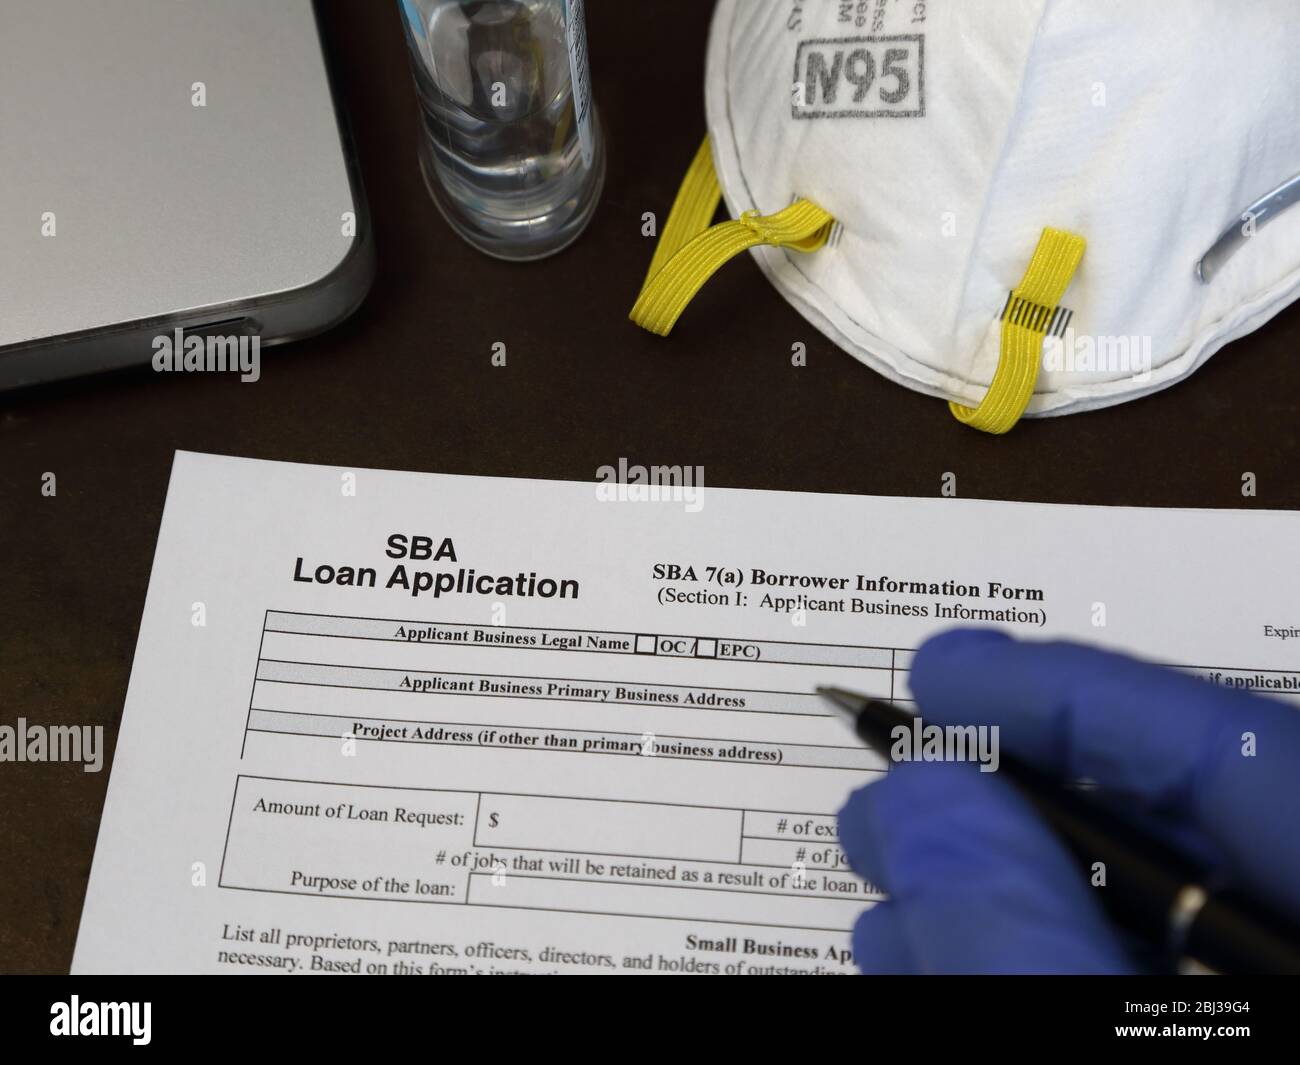 A rubber gloved hand is about to fill out a Small Business Administration aka SBA loan application form, with an N95 respirator dust mask nearby. Stock Photo